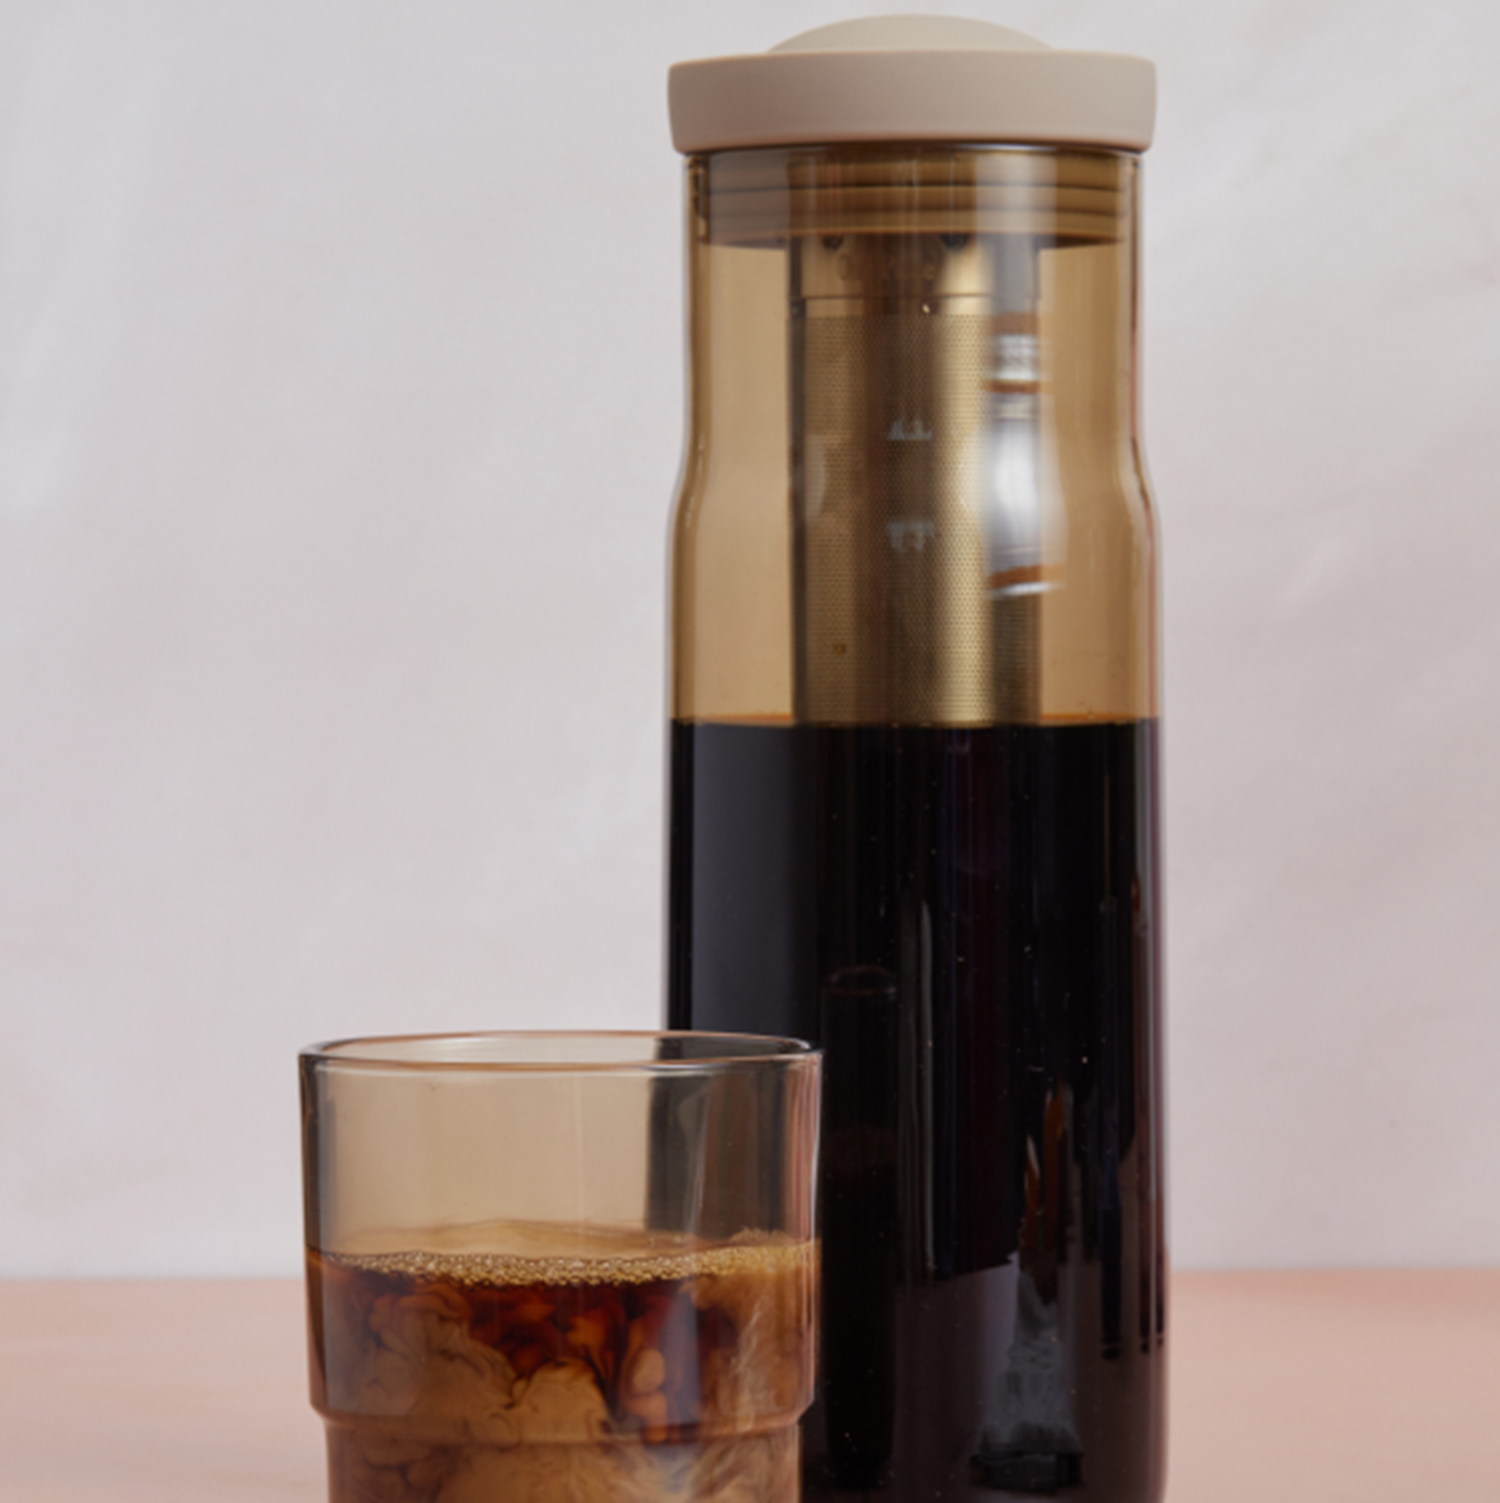 Night + Day Carafe Cold-Brewing Coffee.